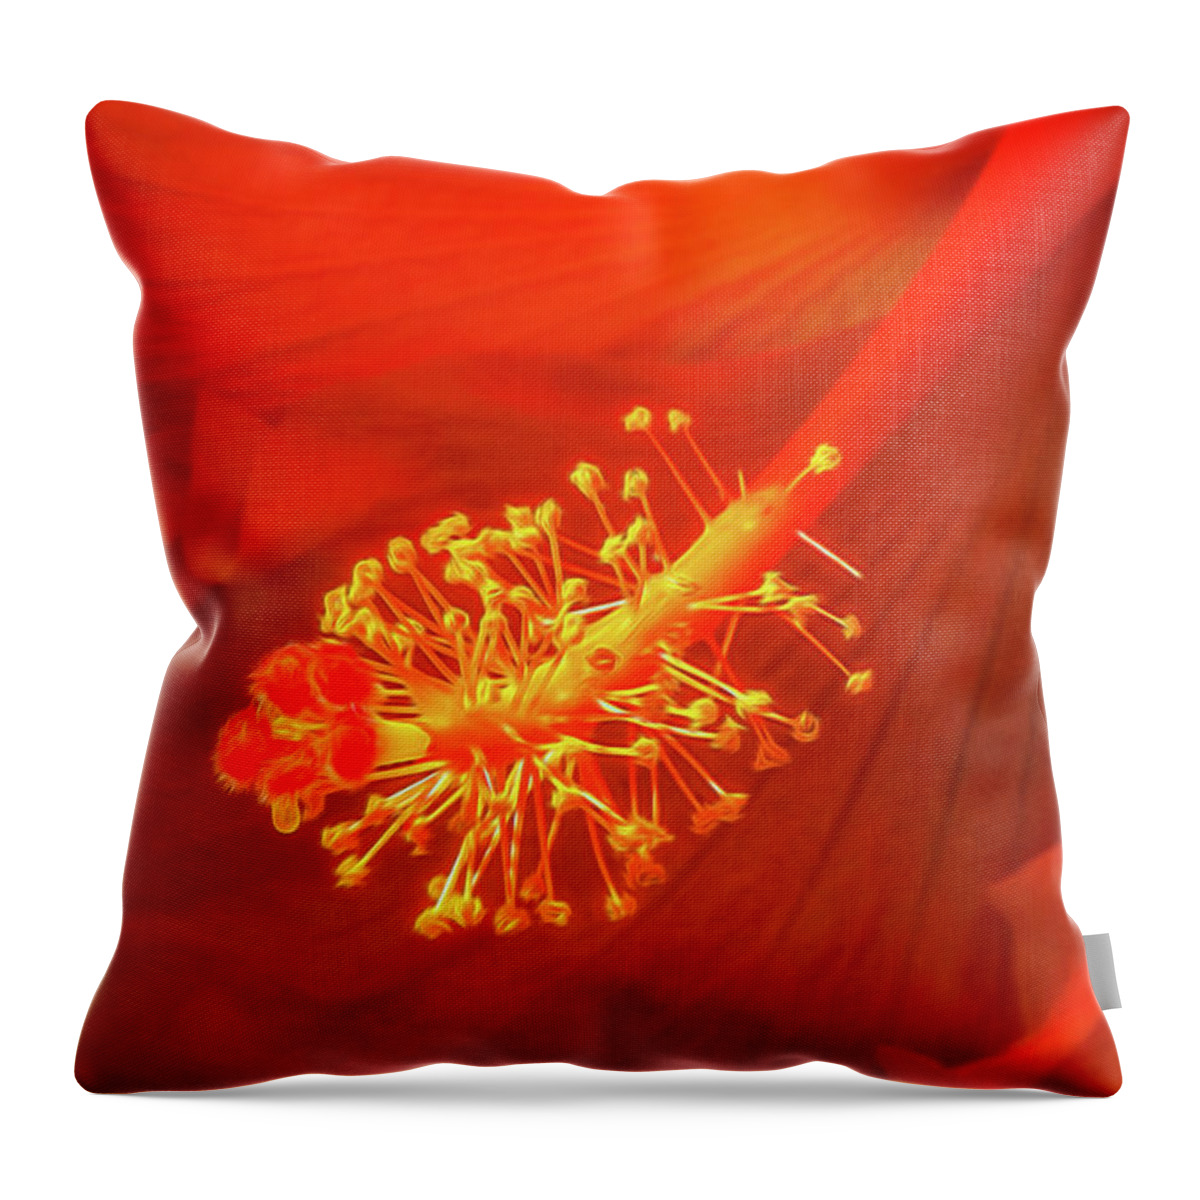 Hibiscus Throw Pillow featuring the photograph Hibiscus Glow by Karen Smale